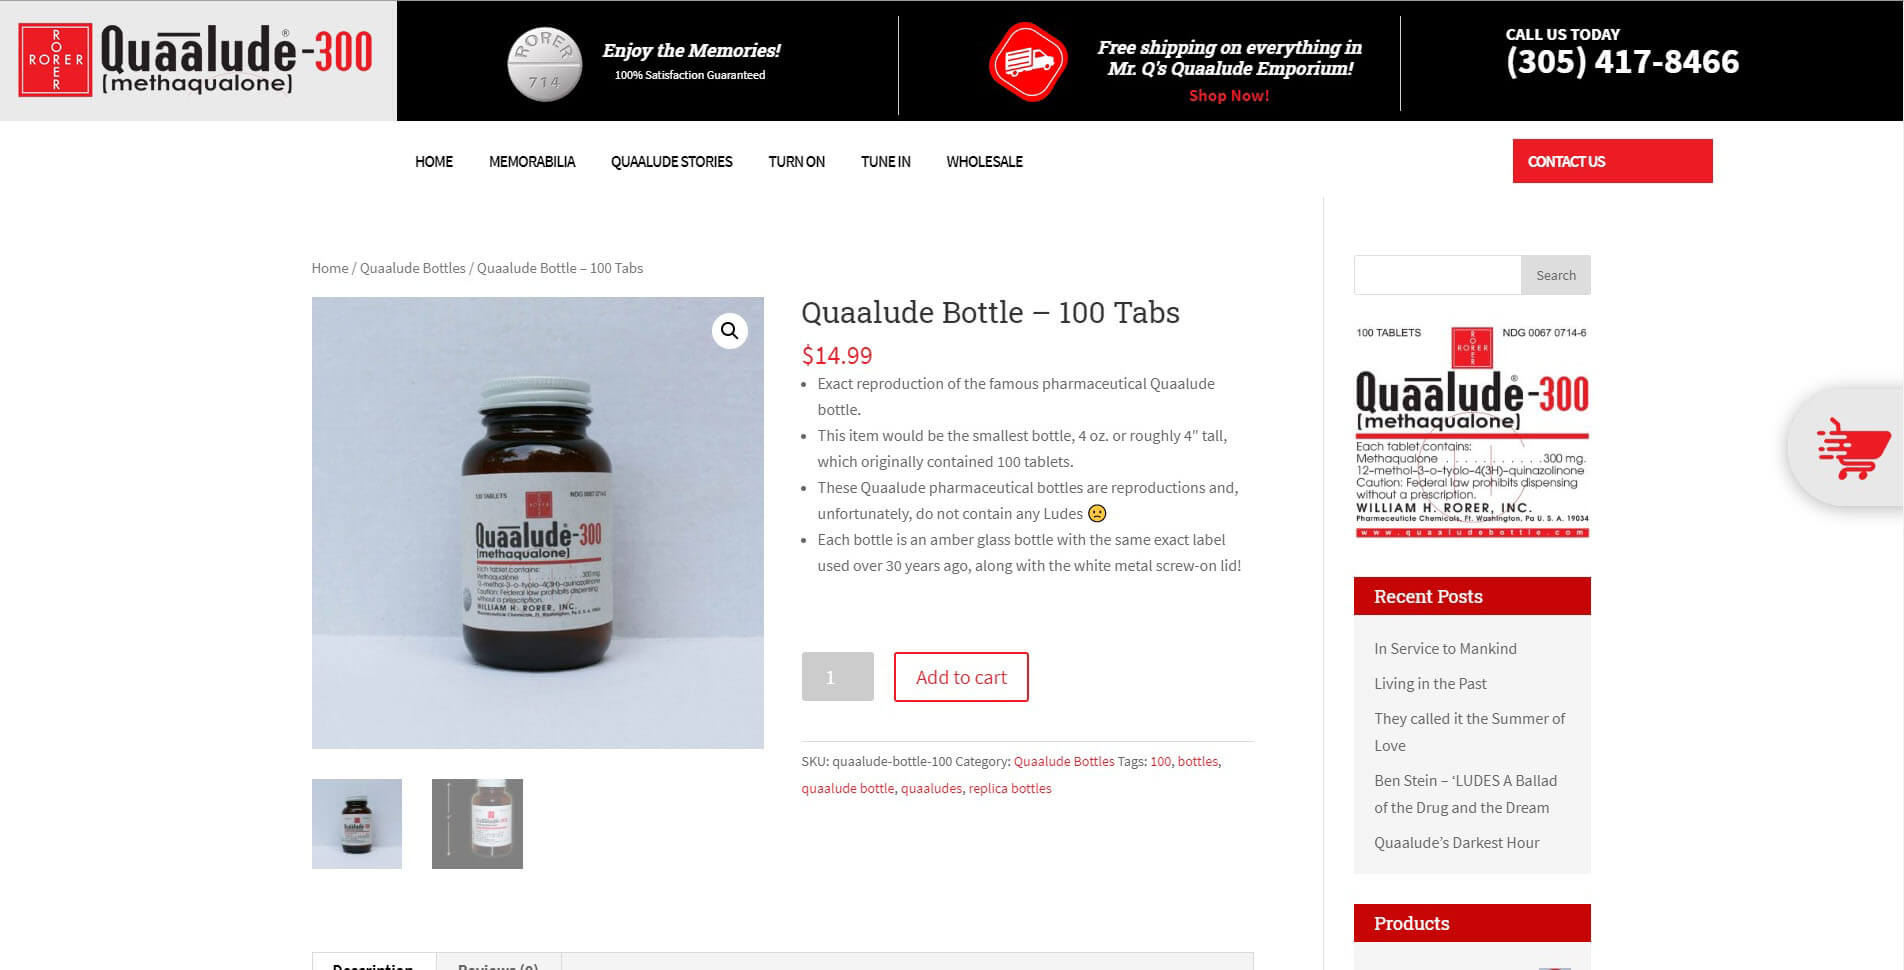 An image of the product page of Quaalude Bottle, website created by Not Fade Away Marketing